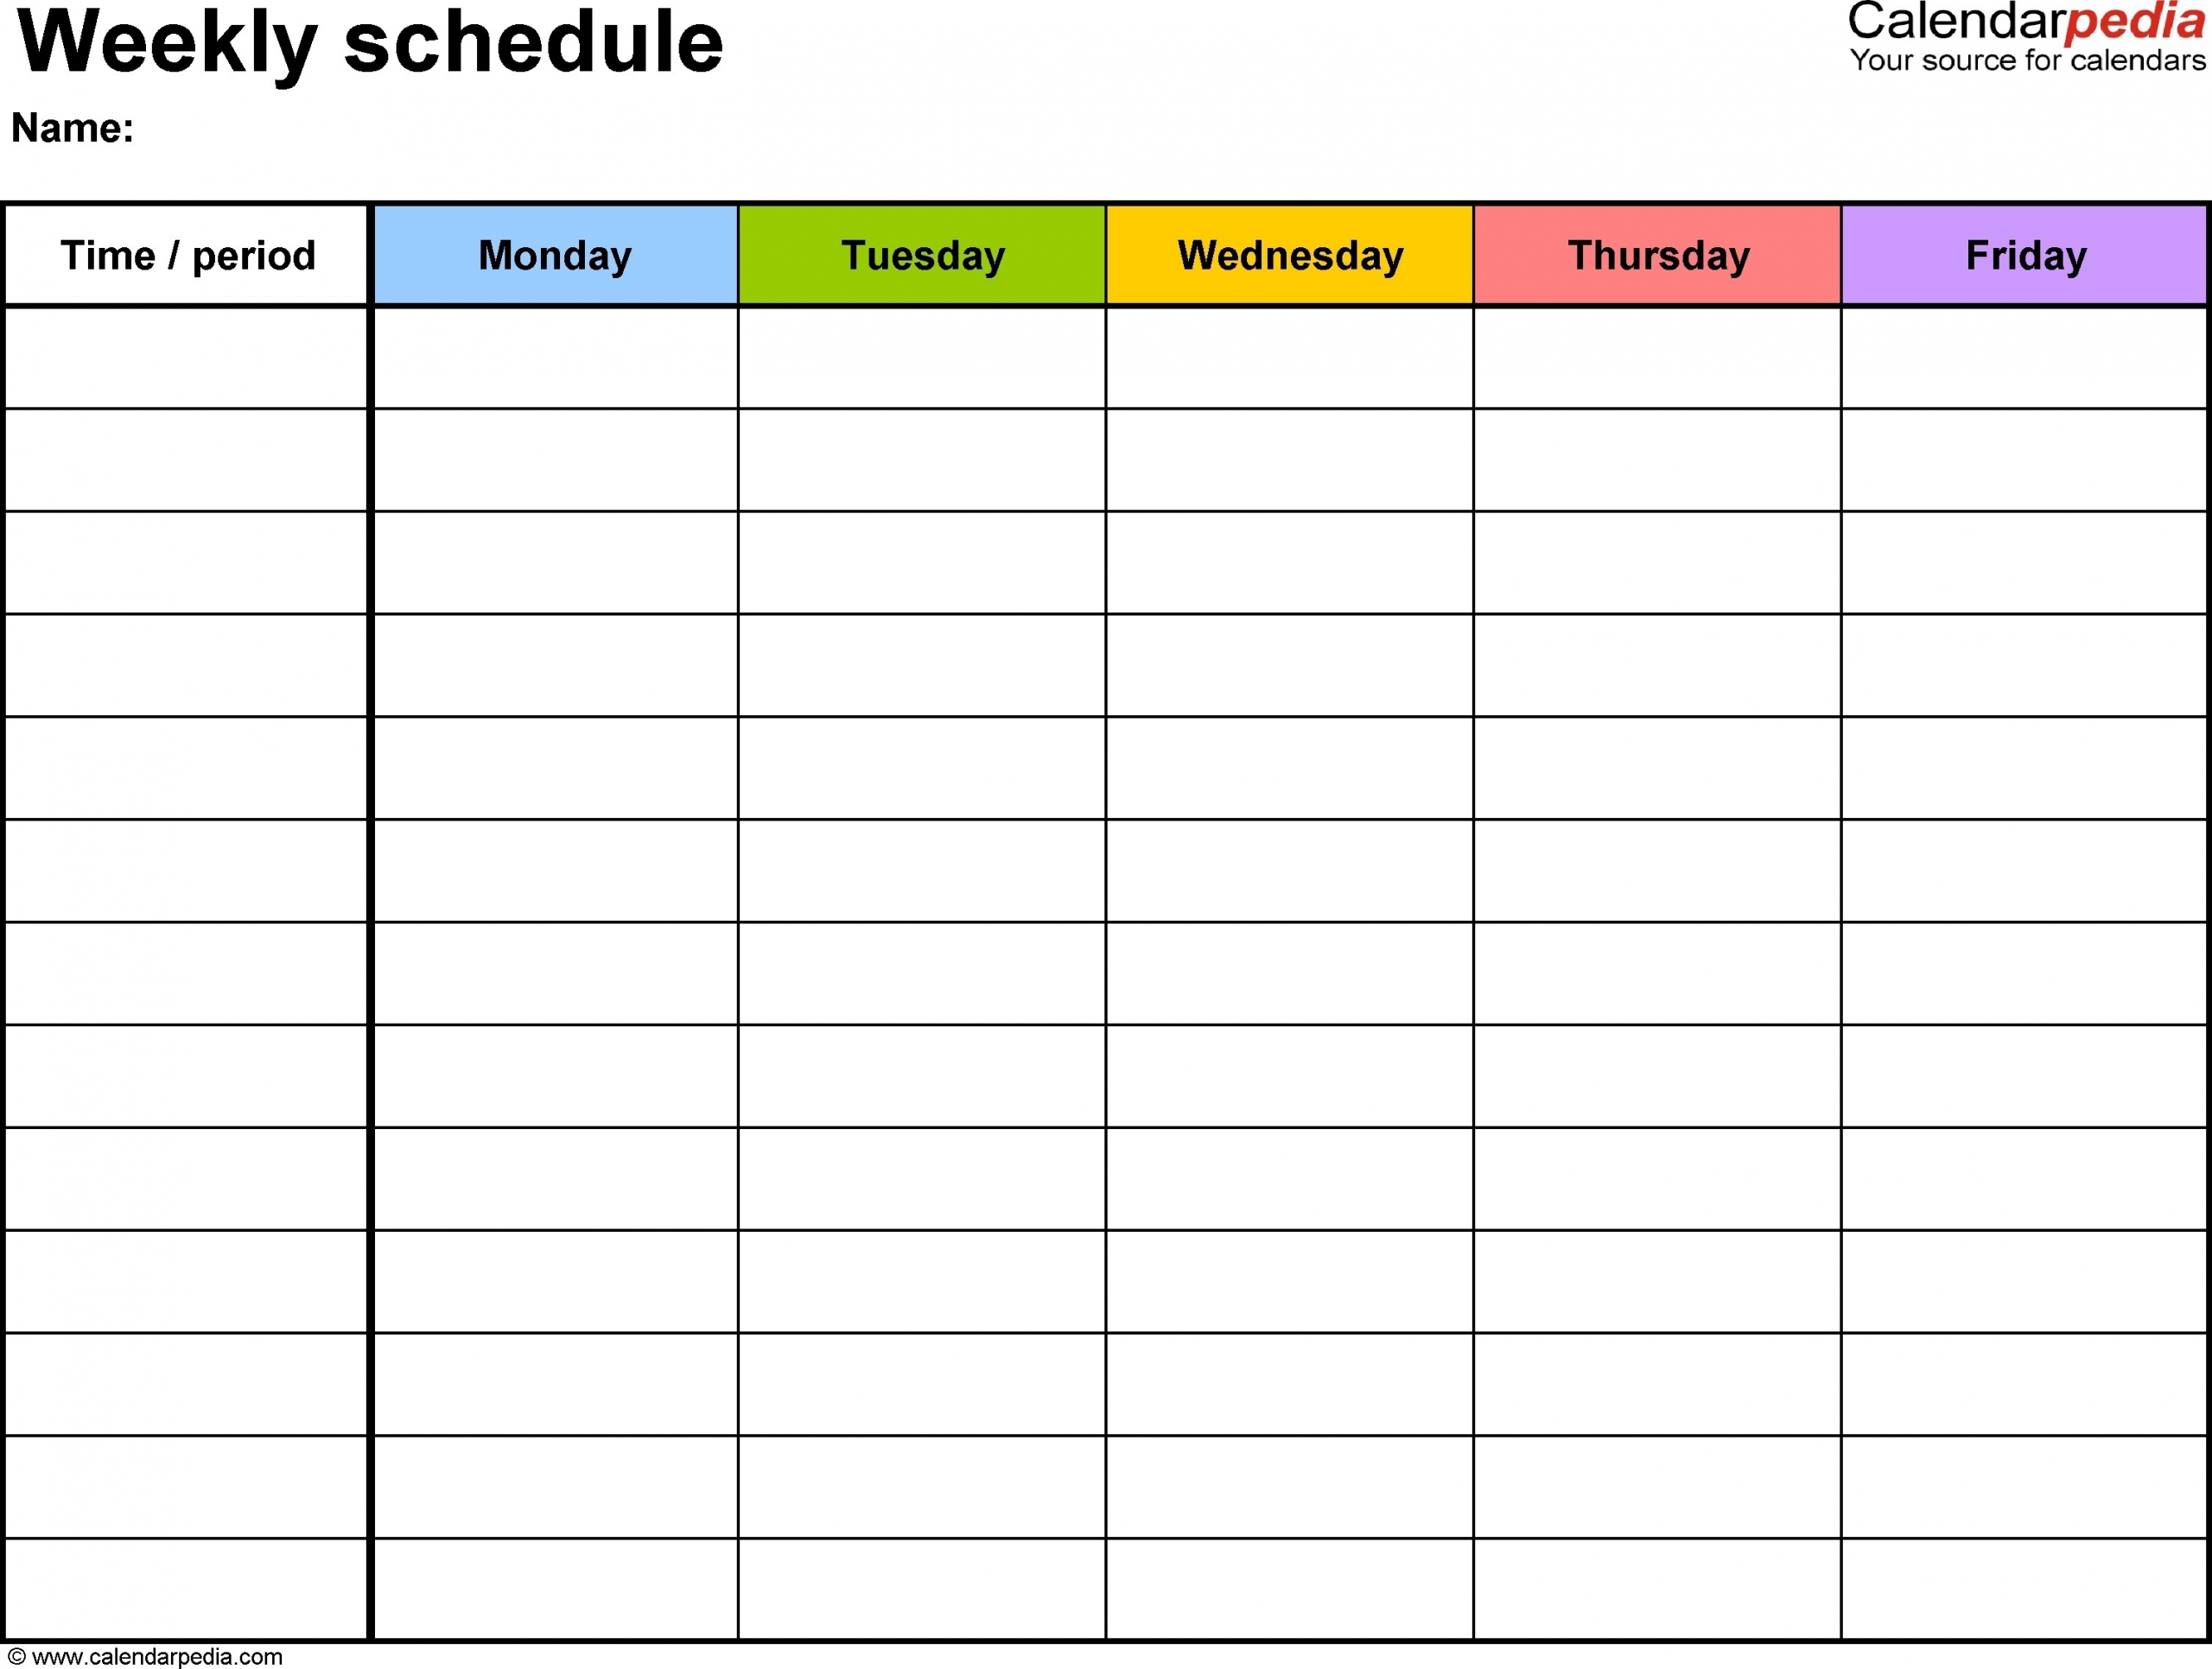 Schedule With Time Slots Printable Printable Calendar 